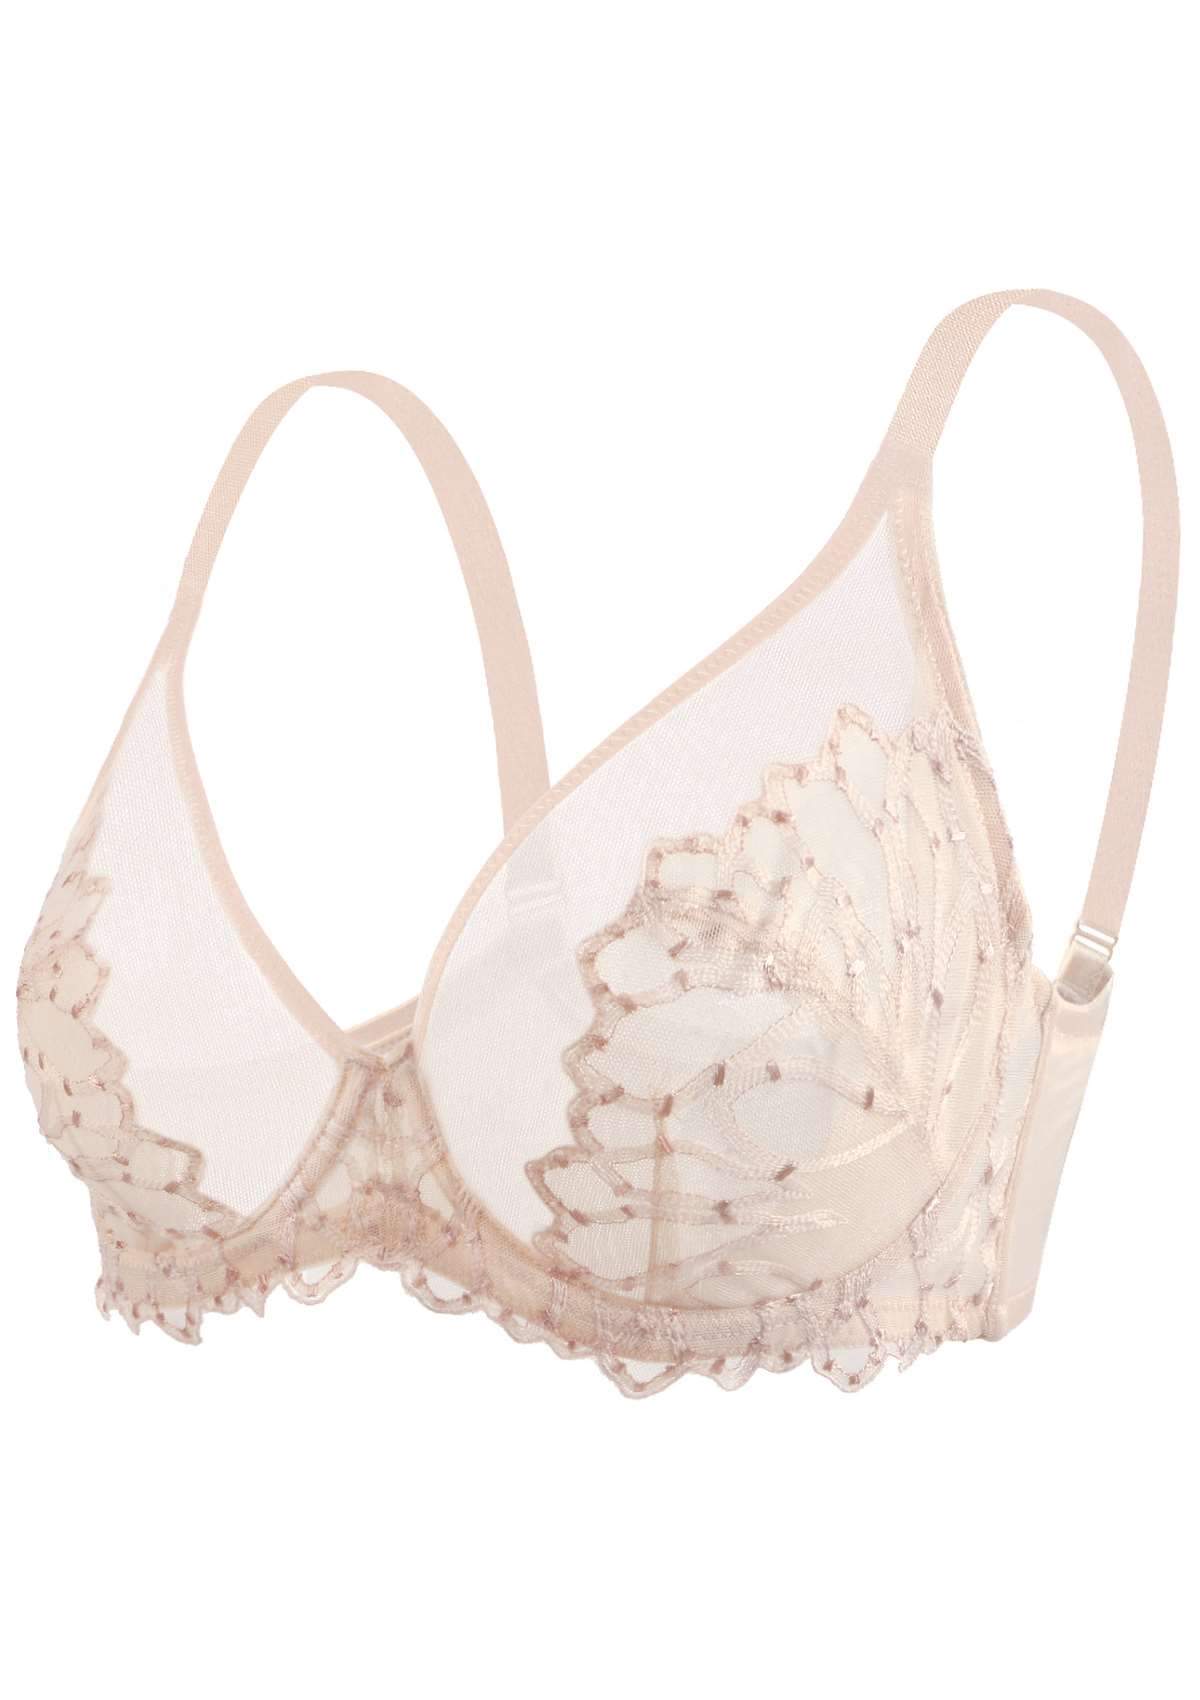 HSIA Chrysanthemum Plus Size Lace Bra: Back Support Bra For Posture - Blue / 32 / D